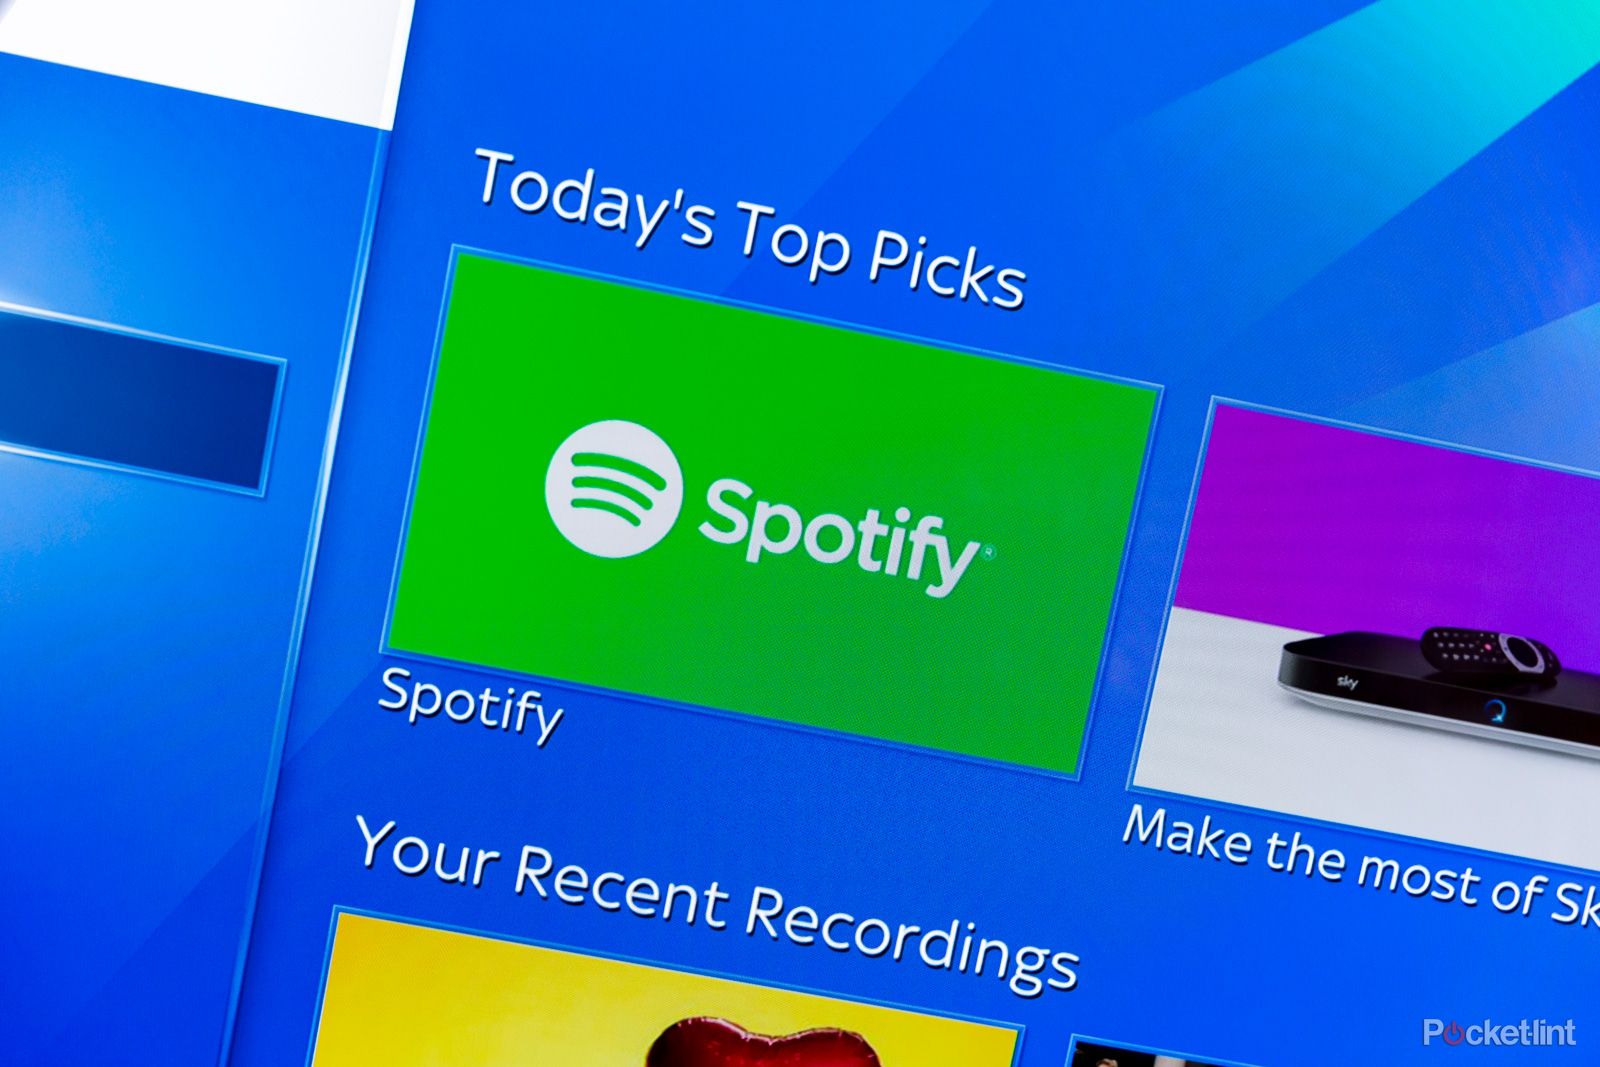 You can now pay for Spotify Premium through your Sky bill each month image 1